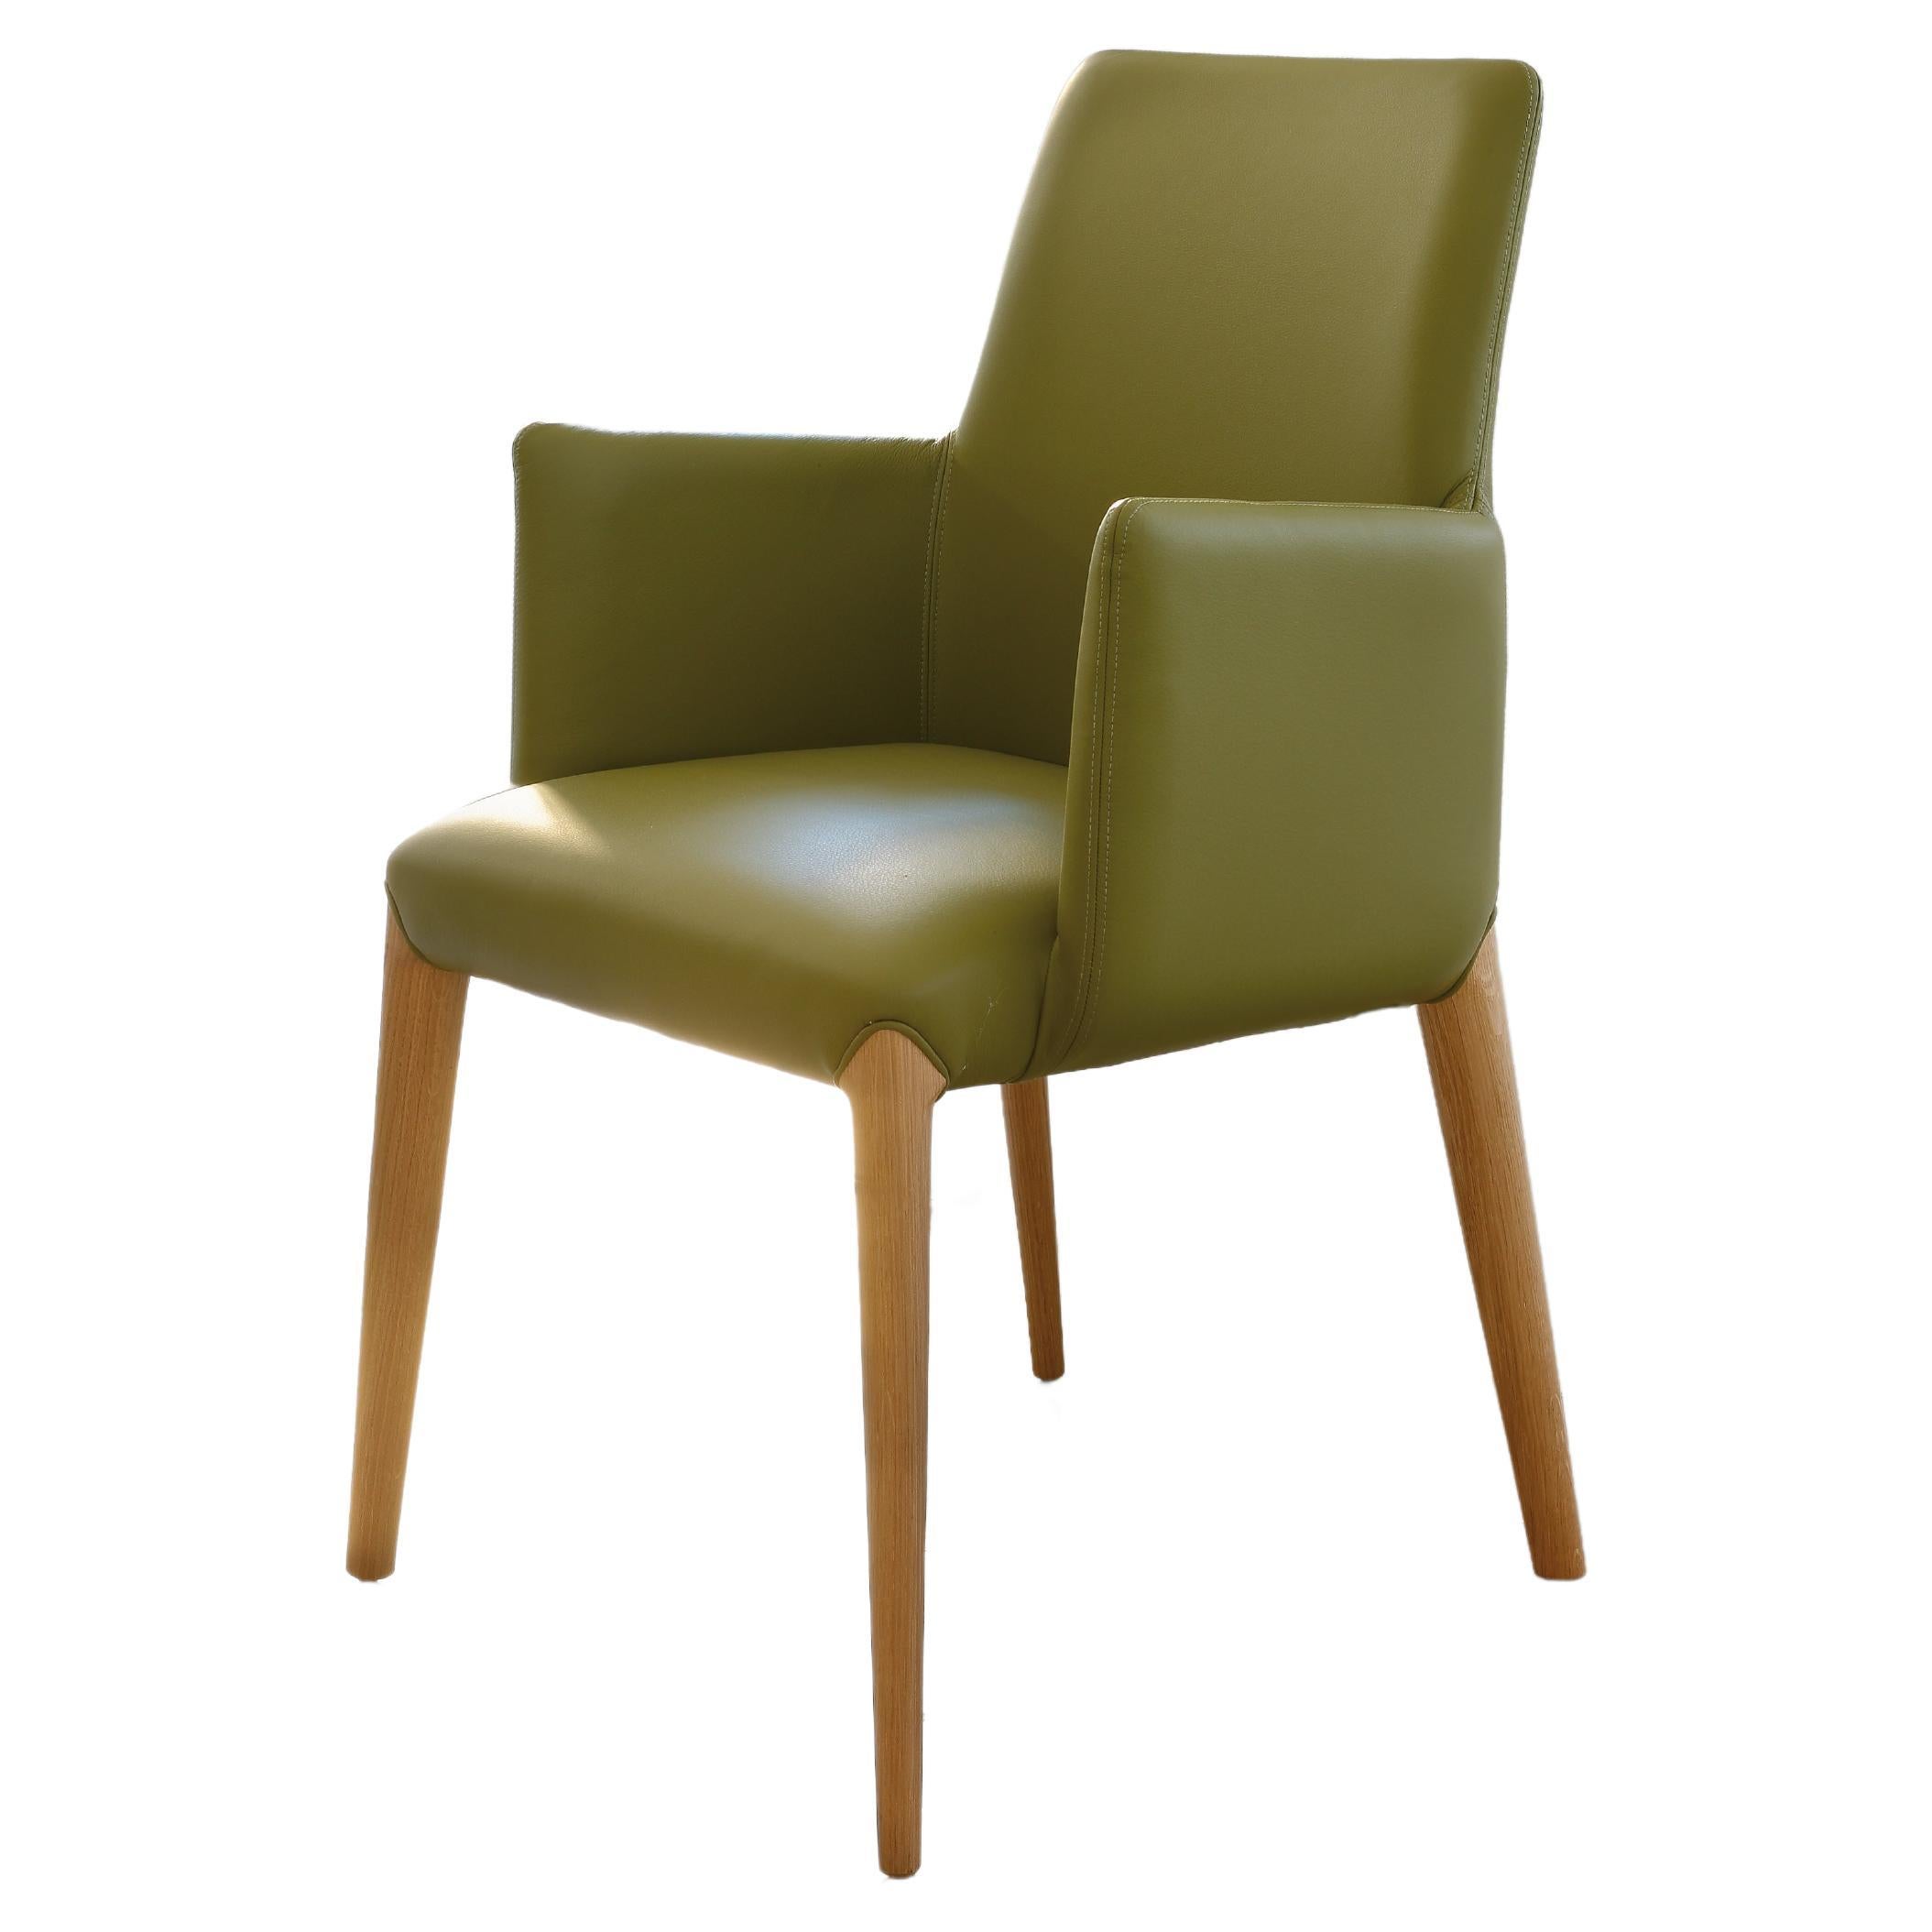 The chair Ines is the excellent italian manufactures.
The frame in solid wood is curved by hand and work with skill.
Painted color walnut or oak.
The padding is soft ,comfortable and at the same time long-lasting, the leather and all the materials